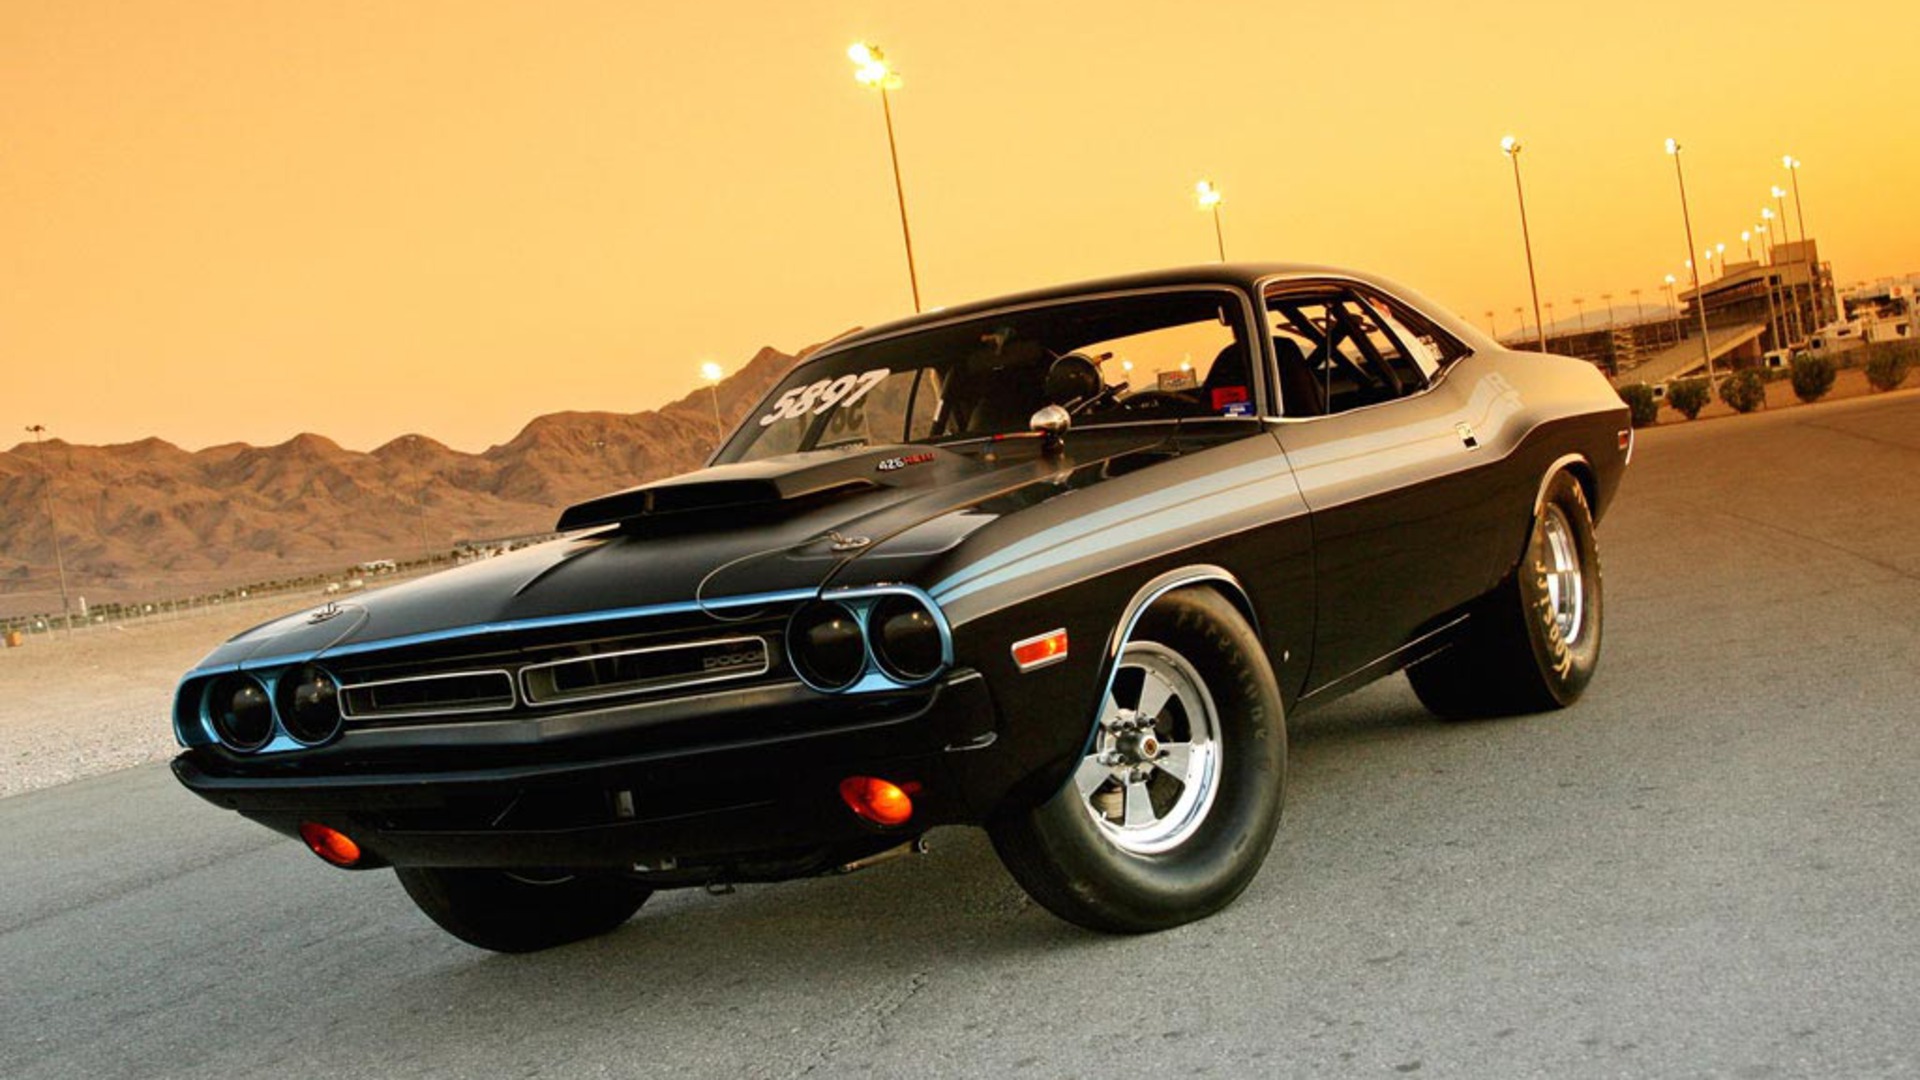 classic muscle car wallpapers   Automotive Zone 1920x1080